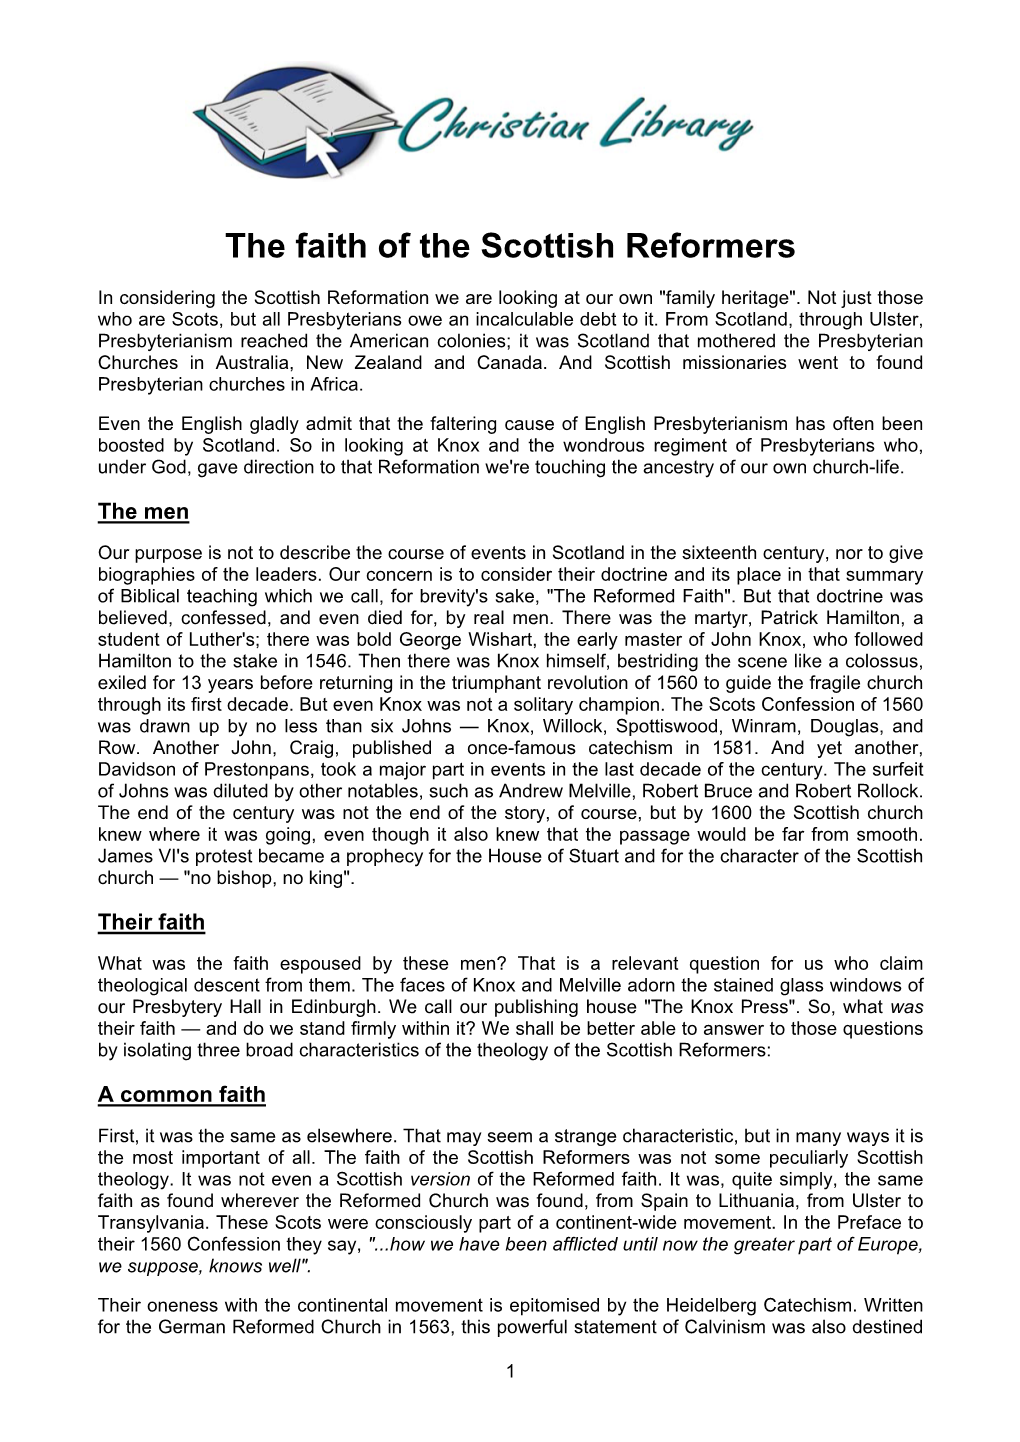 The Faith of the Scottish Reformers